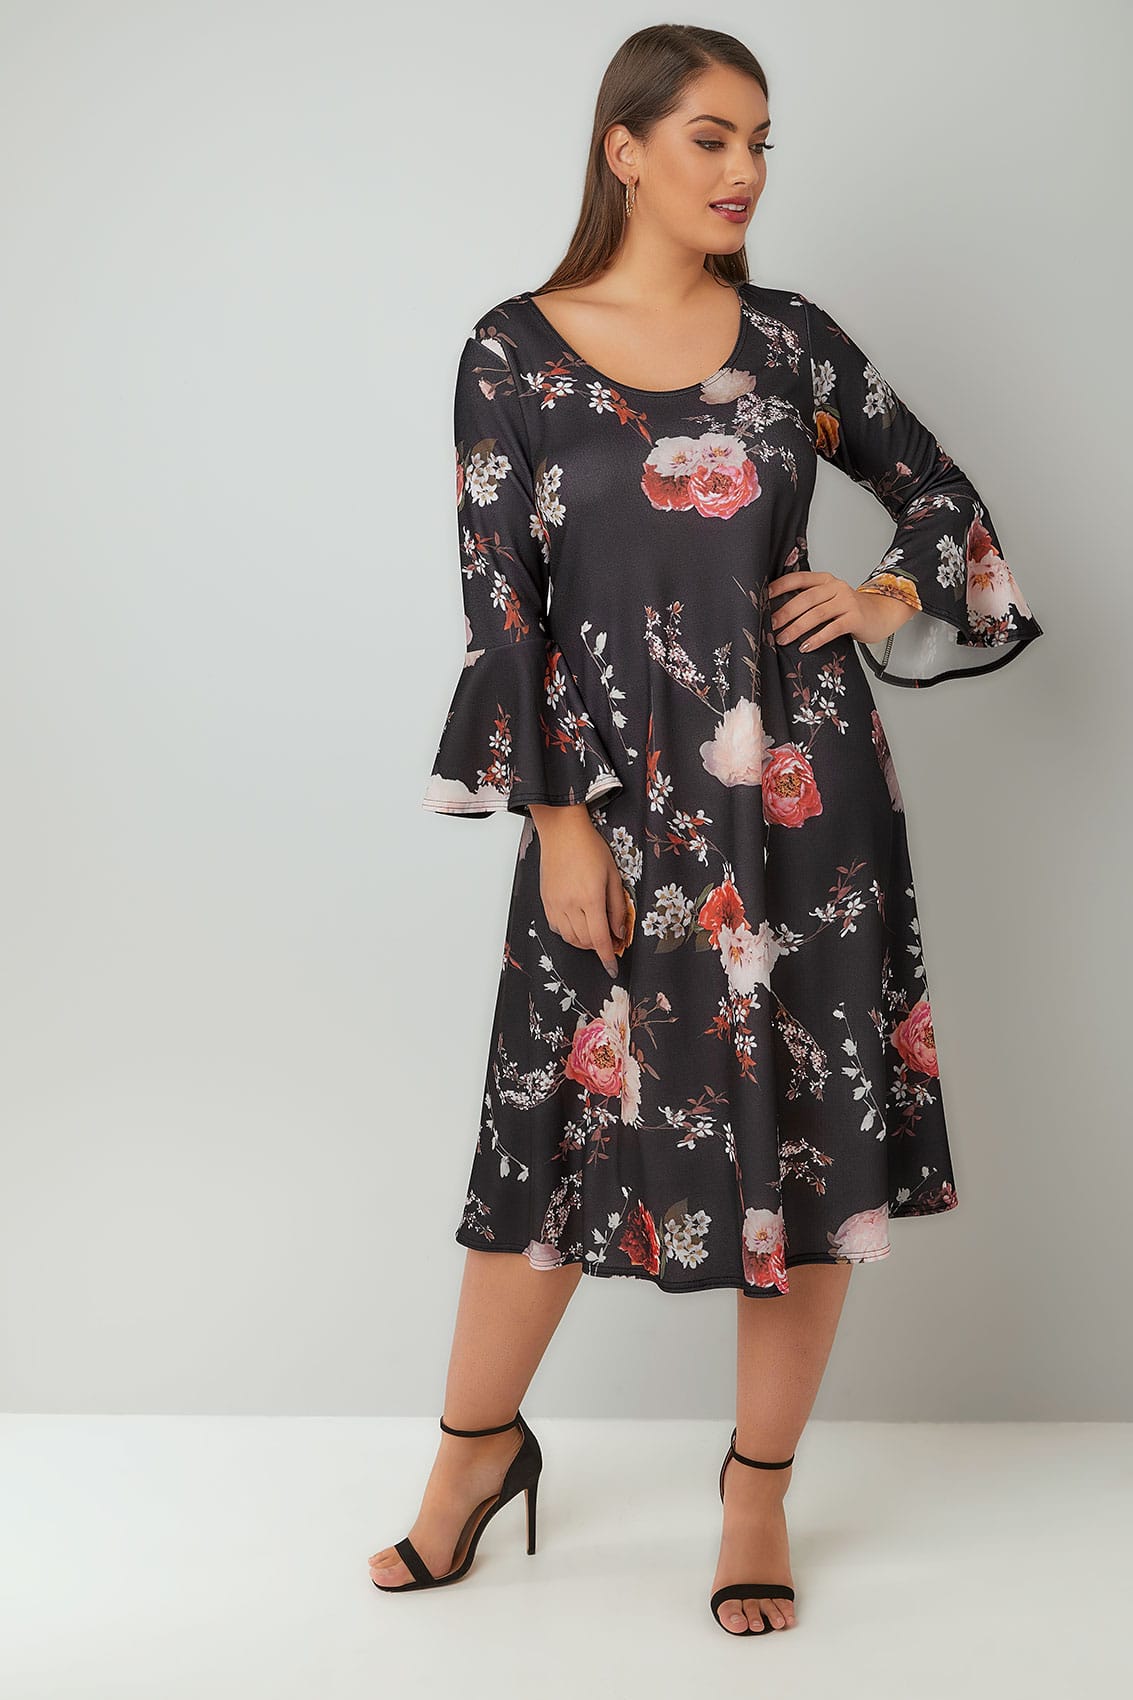 SIENNA COUTURE Black & Multi Dark Floral Swing Dress With Flute Sleeves ...